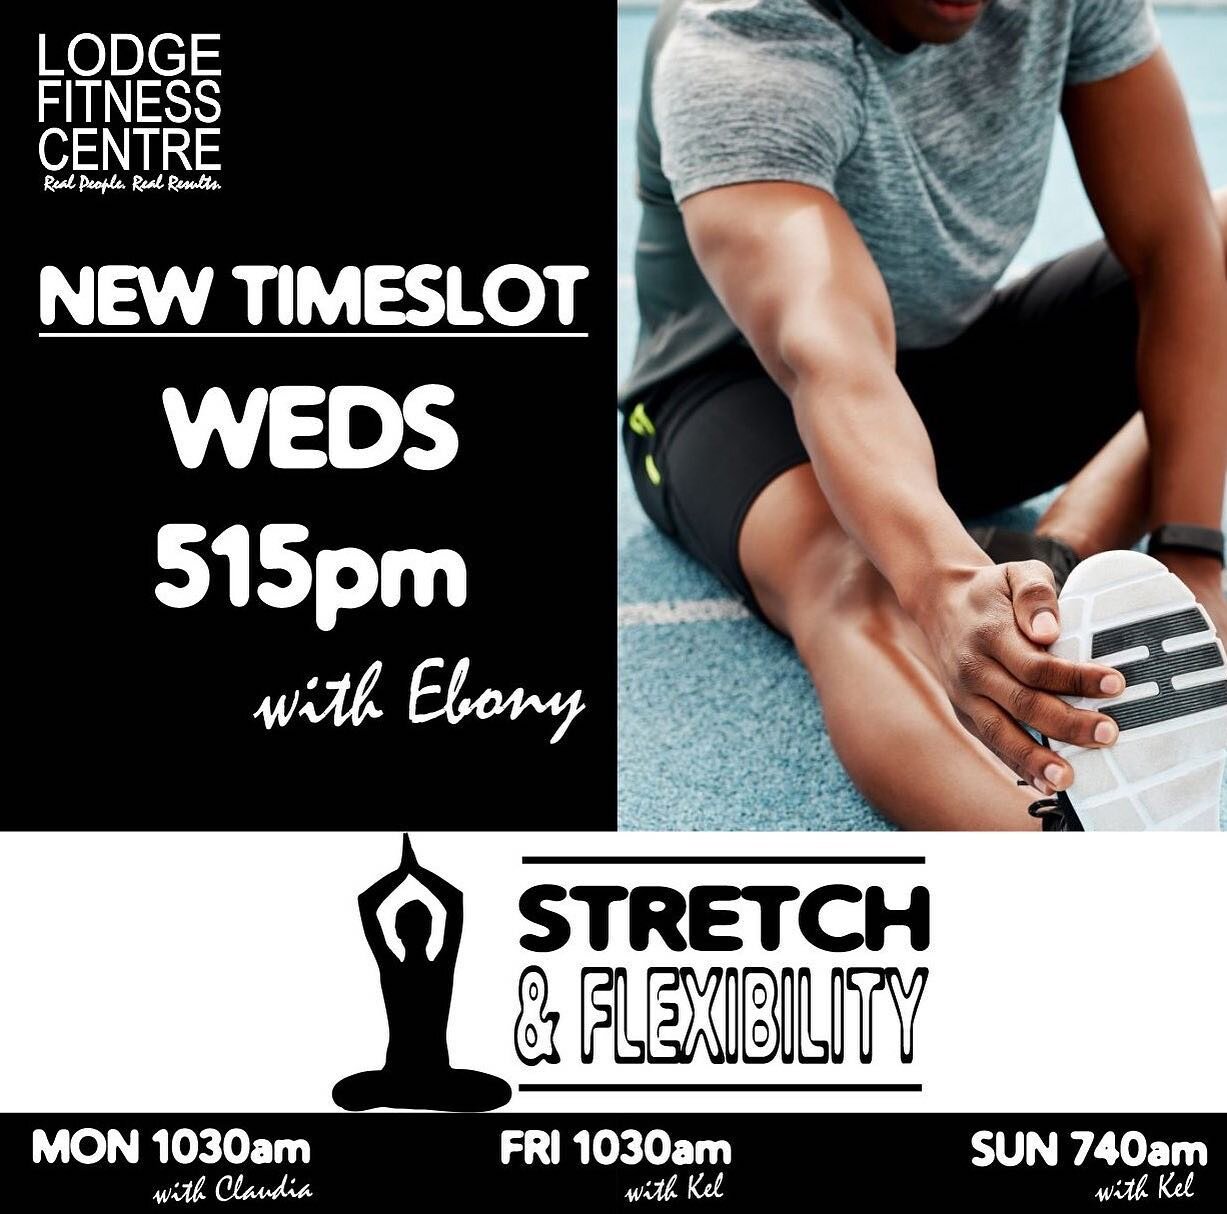 You asked for it! NEW CLASS starting Weds 10th May. Bookings OPEN now on the app! #livelodgefit